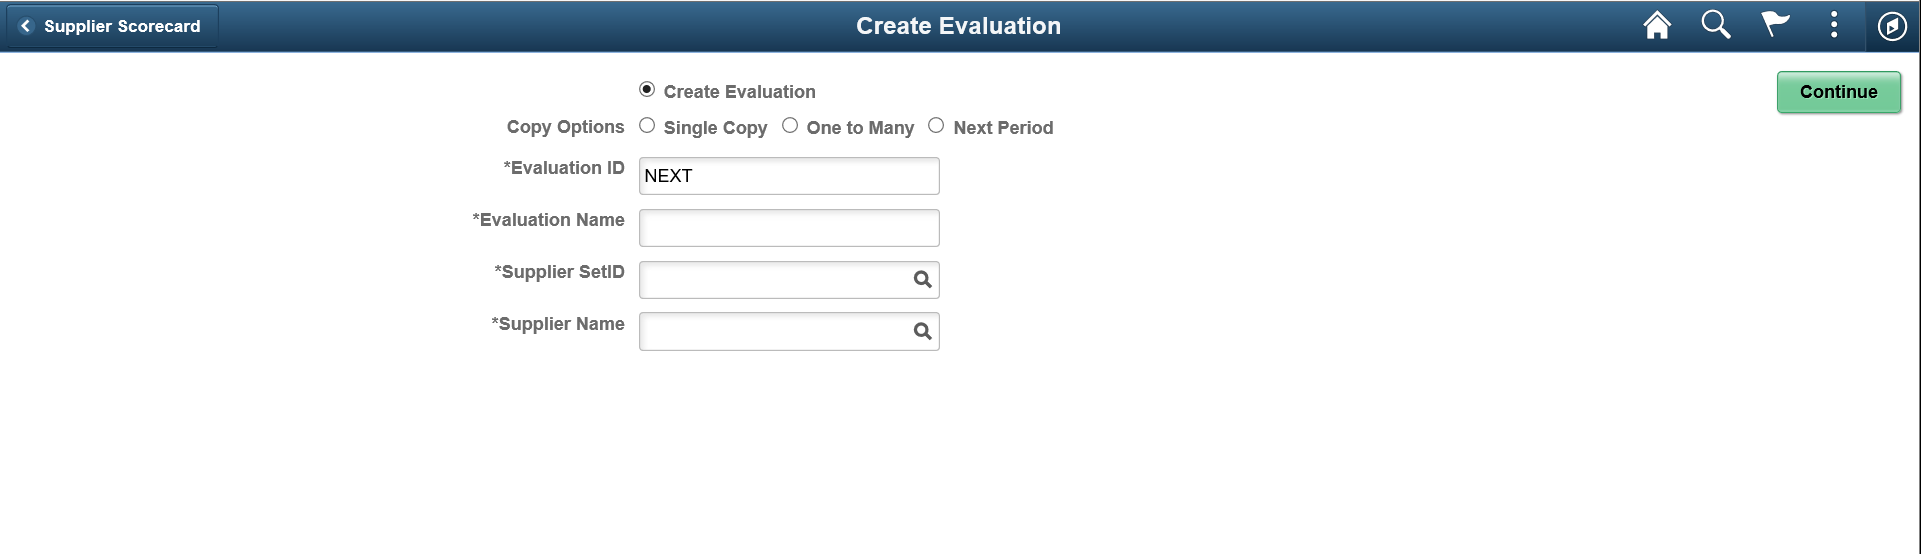 Create Evaluations page